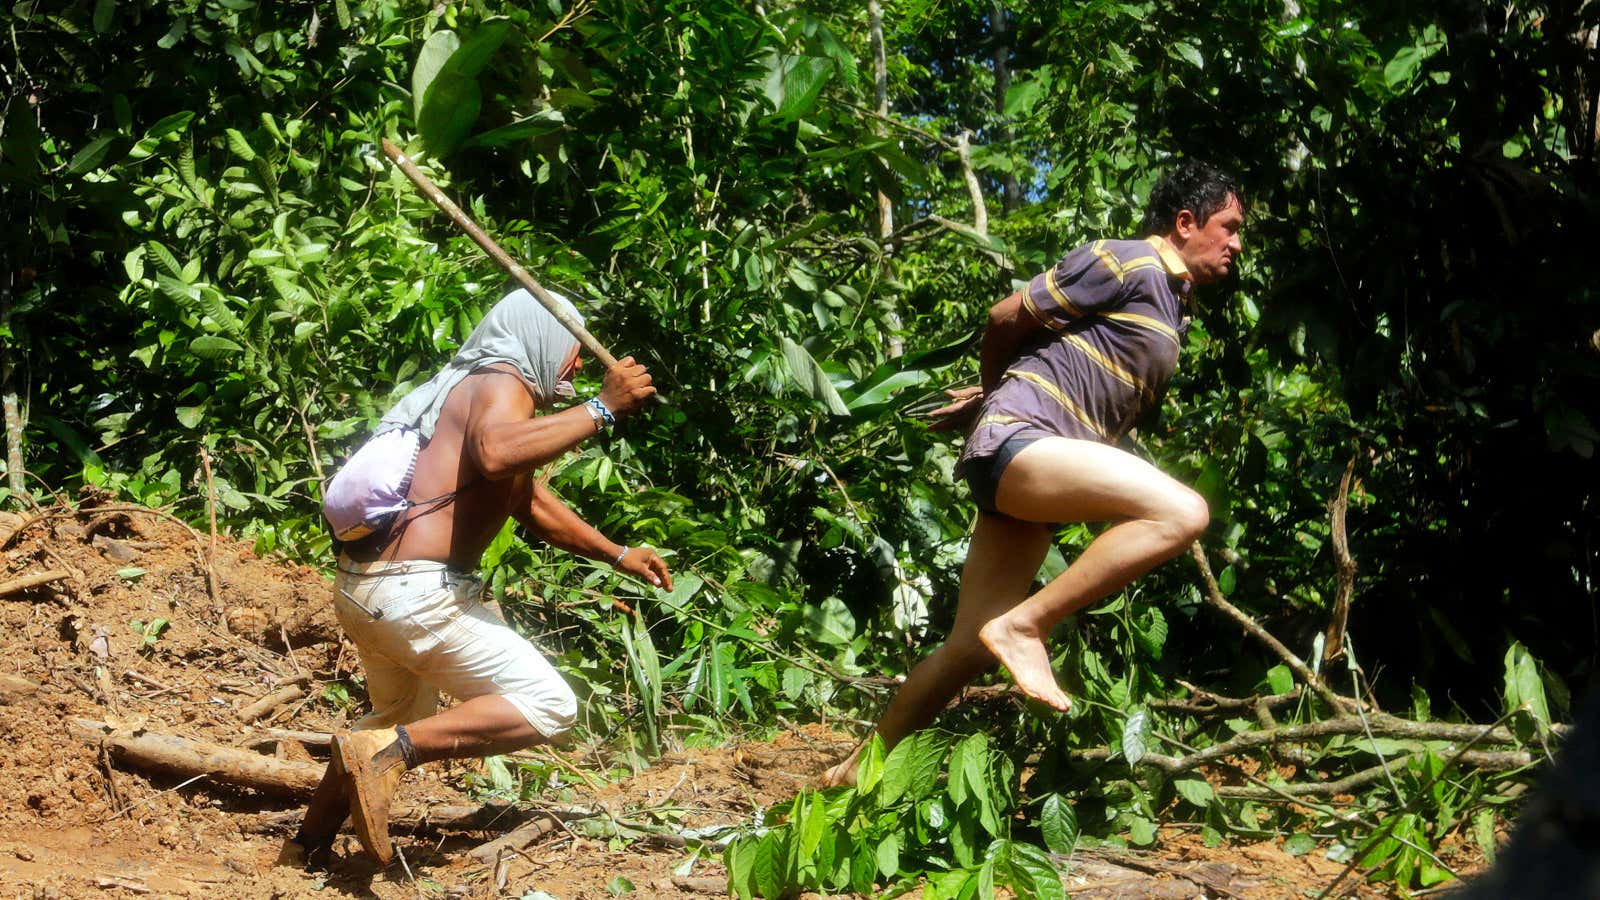 There should be a better way to protect forests than leaving local warriors to drive away loggers.